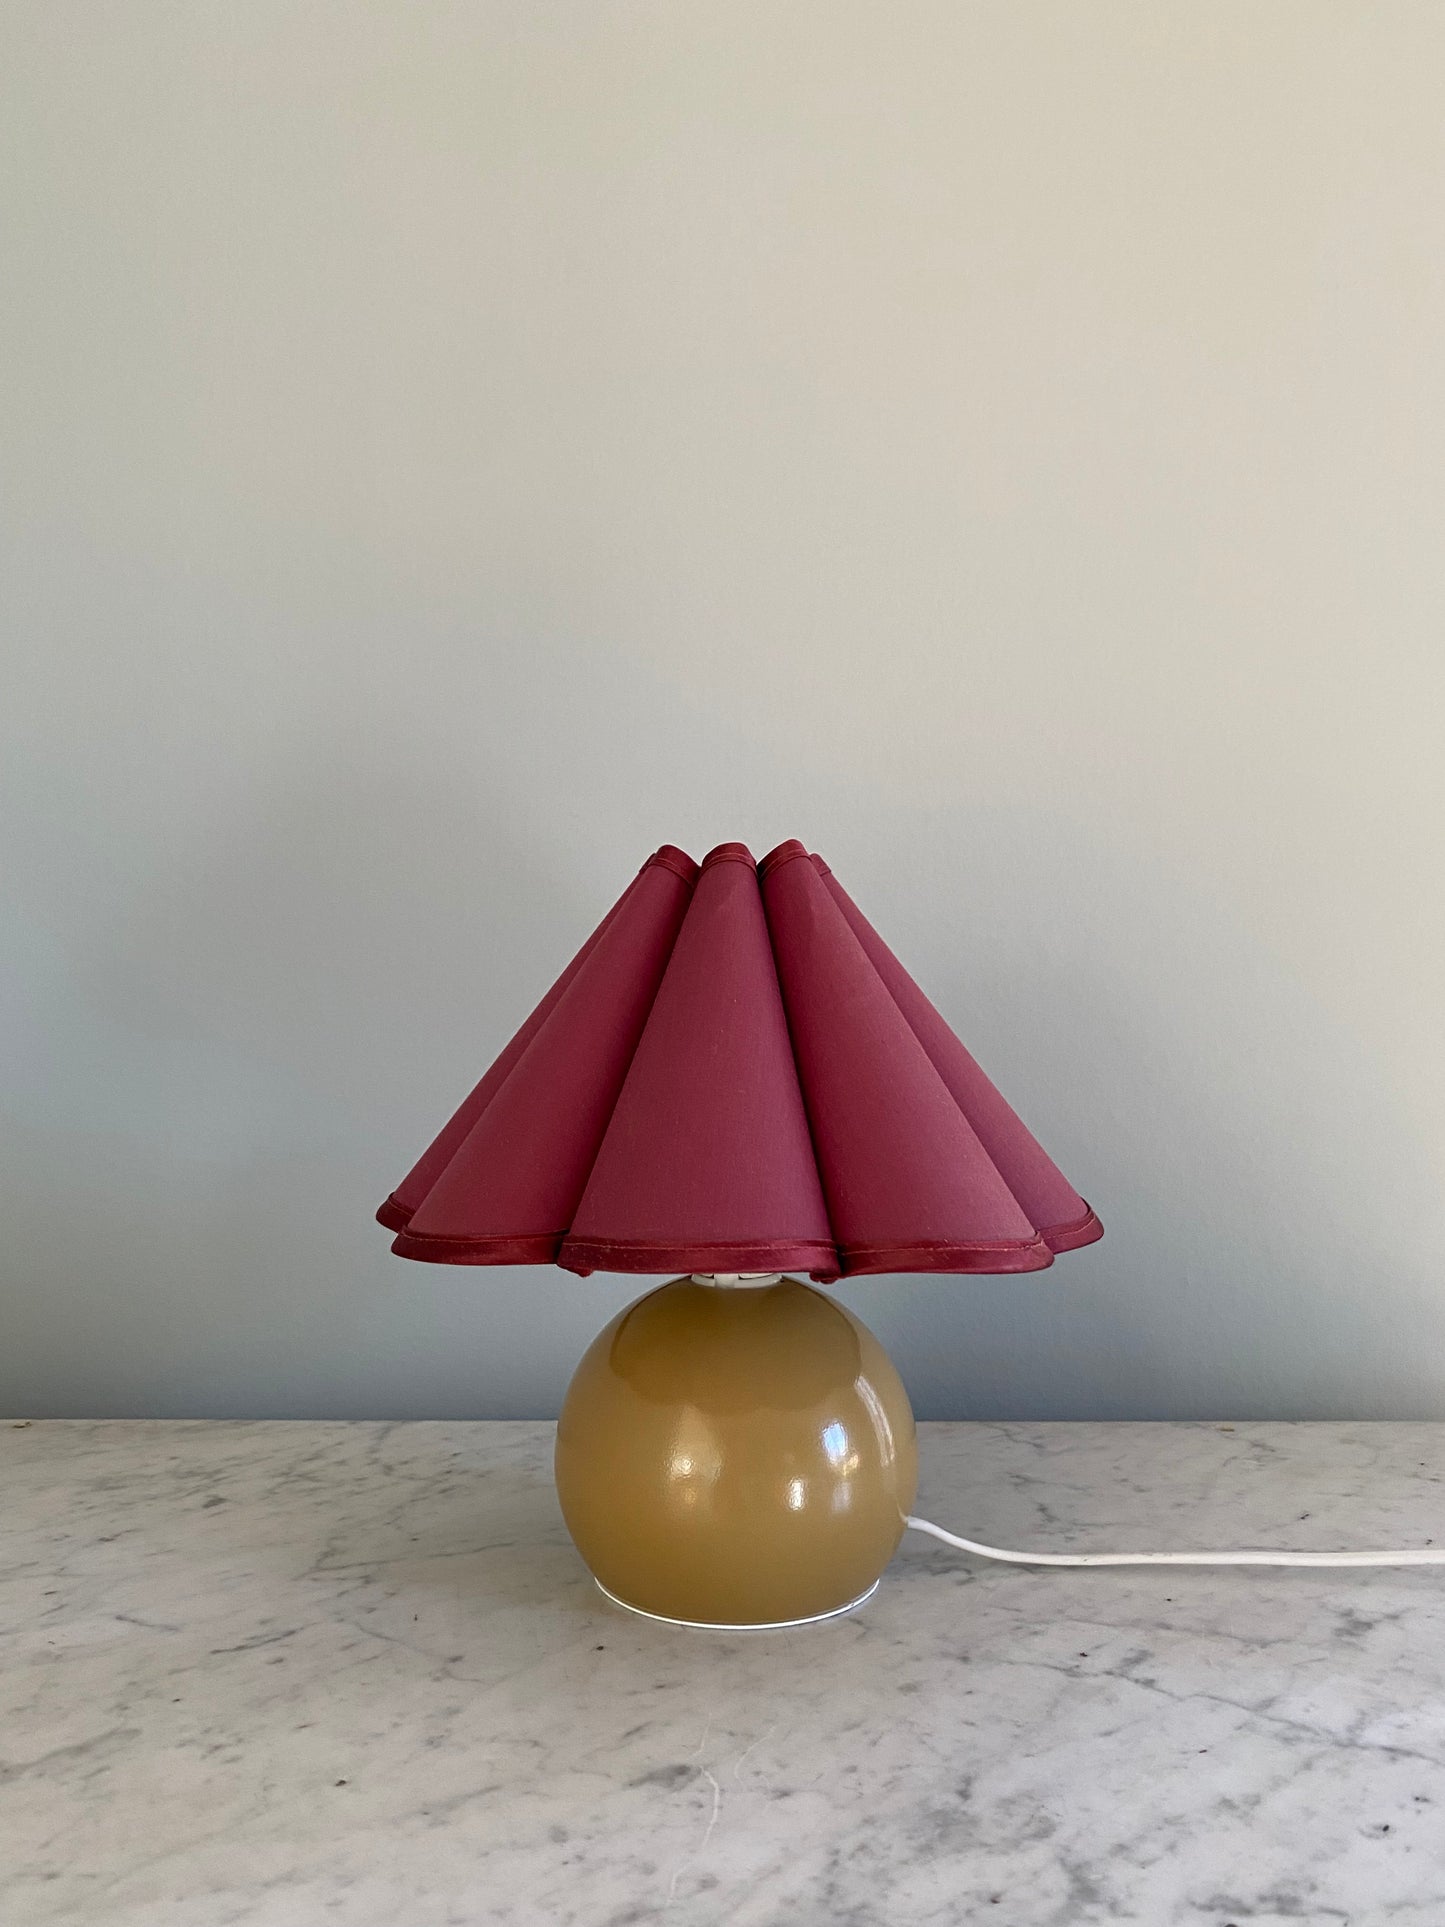 Decorative lamp with a vintage burgundy shade